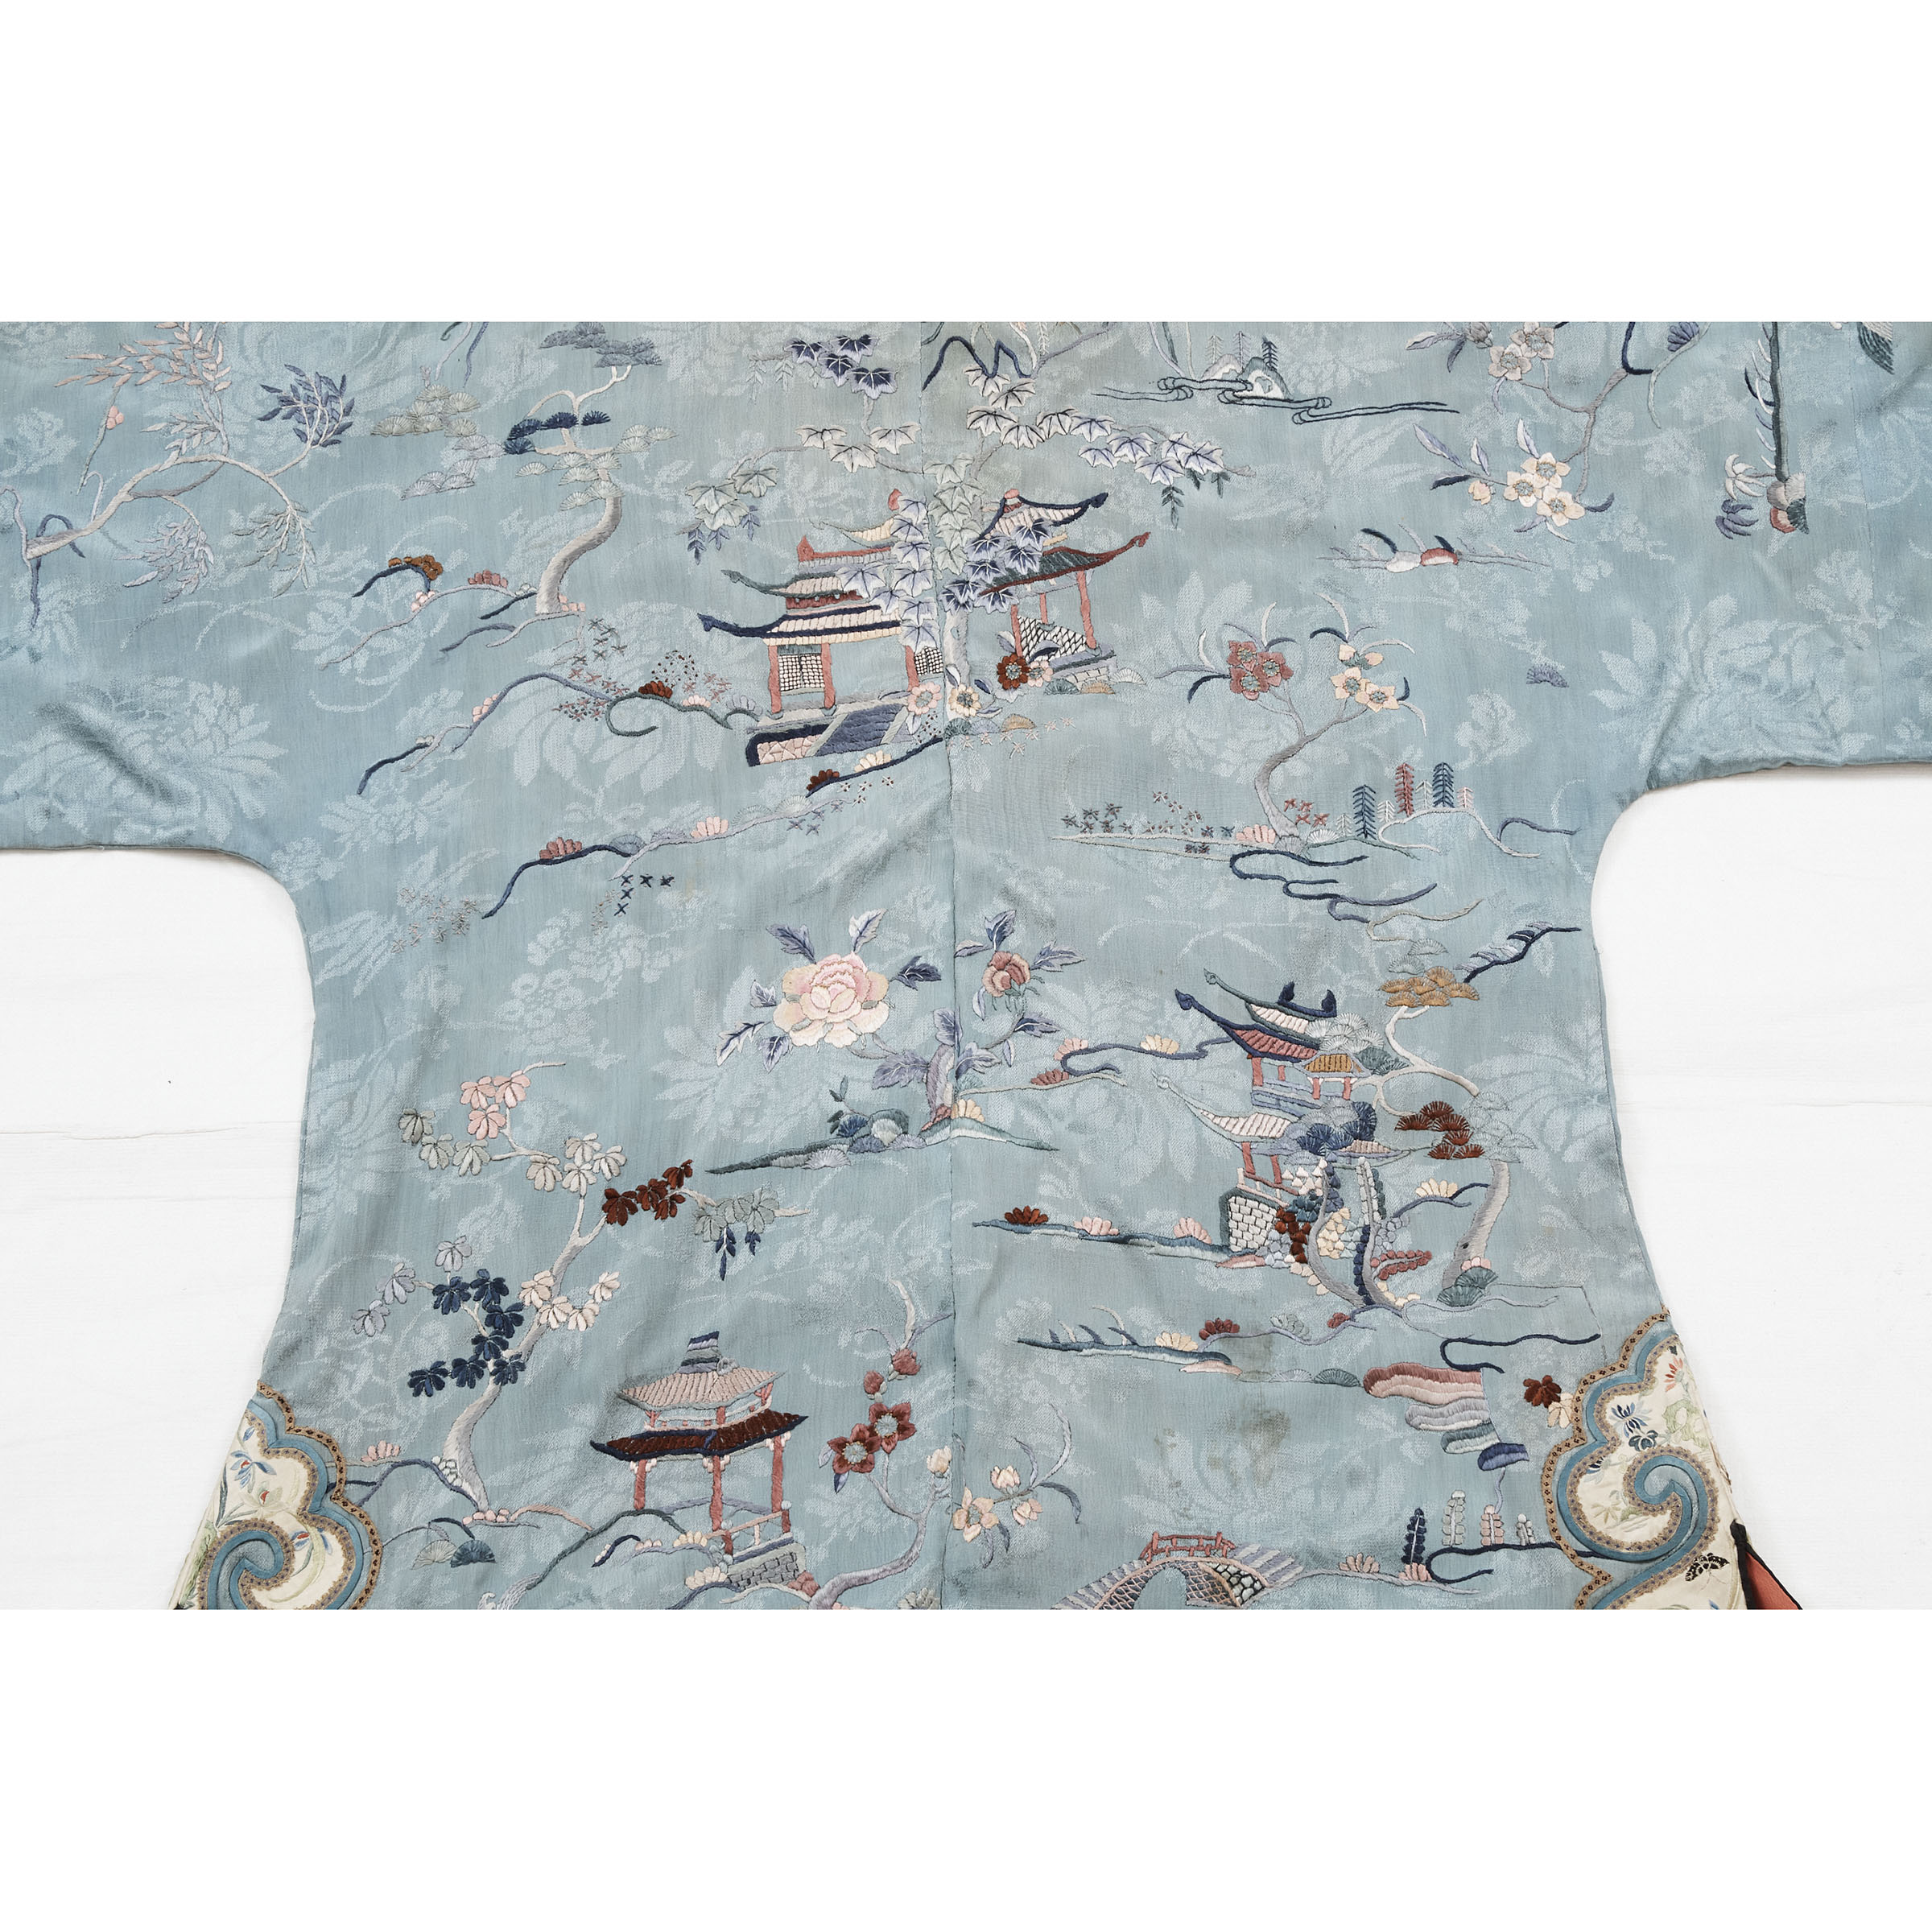 A Chinese Embroidered Pale Blue Ground 'Landscape' Surcoat, 19th Century, 清 十九世纪 蓝地刺绣庭院花卉纹女褂, 40.9 x - Image 3 of 4